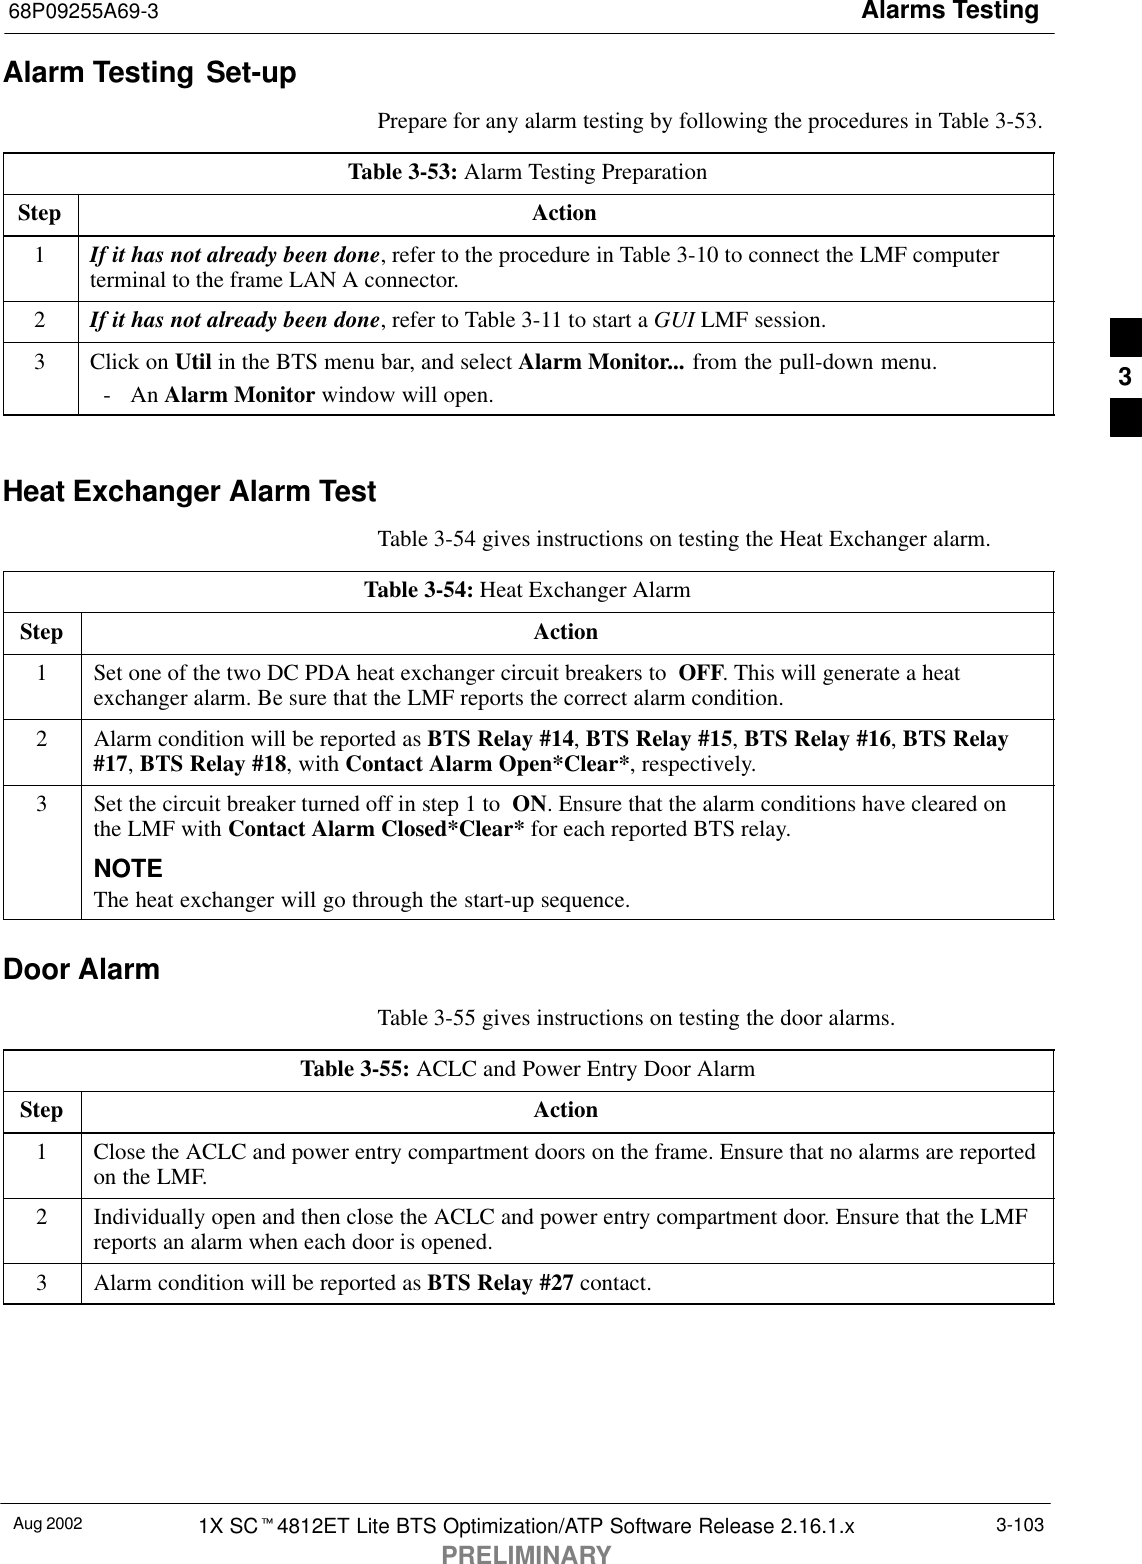 Alarms Testing68P09255A69-3Aug 2002 1X SCt4812ET Lite BTS Optimization/ATP Software Release 2.16.1.xPRELIMINARY3-103Alarm Testing Set-upPrepare for any alarm testing by following the procedures in Table 3-53.Table 3-53: Alarm Testing PreparationStep Action1If it has not already been done, refer to the procedure in Table 3-10 to connect the LMF computerterminal to the frame LAN A connector.2If it has not already been done, refer to Table 3-11 to start a GUI LMF session.3Click on Util in the BTS menu bar, and select Alarm Monitor... from the pull-down menu.- An Alarm Monitor window will open. Heat Exchanger Alarm TestTable 3-54 gives instructions on testing the Heat Exchanger alarm.Table 3-54: Heat Exchanger AlarmStep Action1Set one of the two DC PDA heat exchanger circuit breakers to  OFF. This will generate a heatexchanger alarm. Be sure that the LMF reports the correct alarm condition.2Alarm condition will be reported as BTS Relay #14, BTS Relay #15, BTS Relay #16, BTS Relay#17, BTS Relay #18, with Contact Alarm Open*Clear*, respectively.3Set the circuit breaker turned off in step 1 to  ON. Ensure that the alarm conditions have cleared onthe LMF with Contact Alarm Closed*Clear* for each reported BTS relay.NOTEThe heat exchanger will go through the start-up sequence.Door AlarmTable 3-55 gives instructions on testing the door alarms.Table 3-55: ACLC and Power Entry Door AlarmStep Action1Close the ACLC and power entry compartment doors on the frame. Ensure that no alarms are reportedon the LMF.2Individually open and then close the ACLC and power entry compartment door. Ensure that the LMFreports an alarm when each door is opened.3Alarm condition will be reported as BTS Relay #27 contact.3